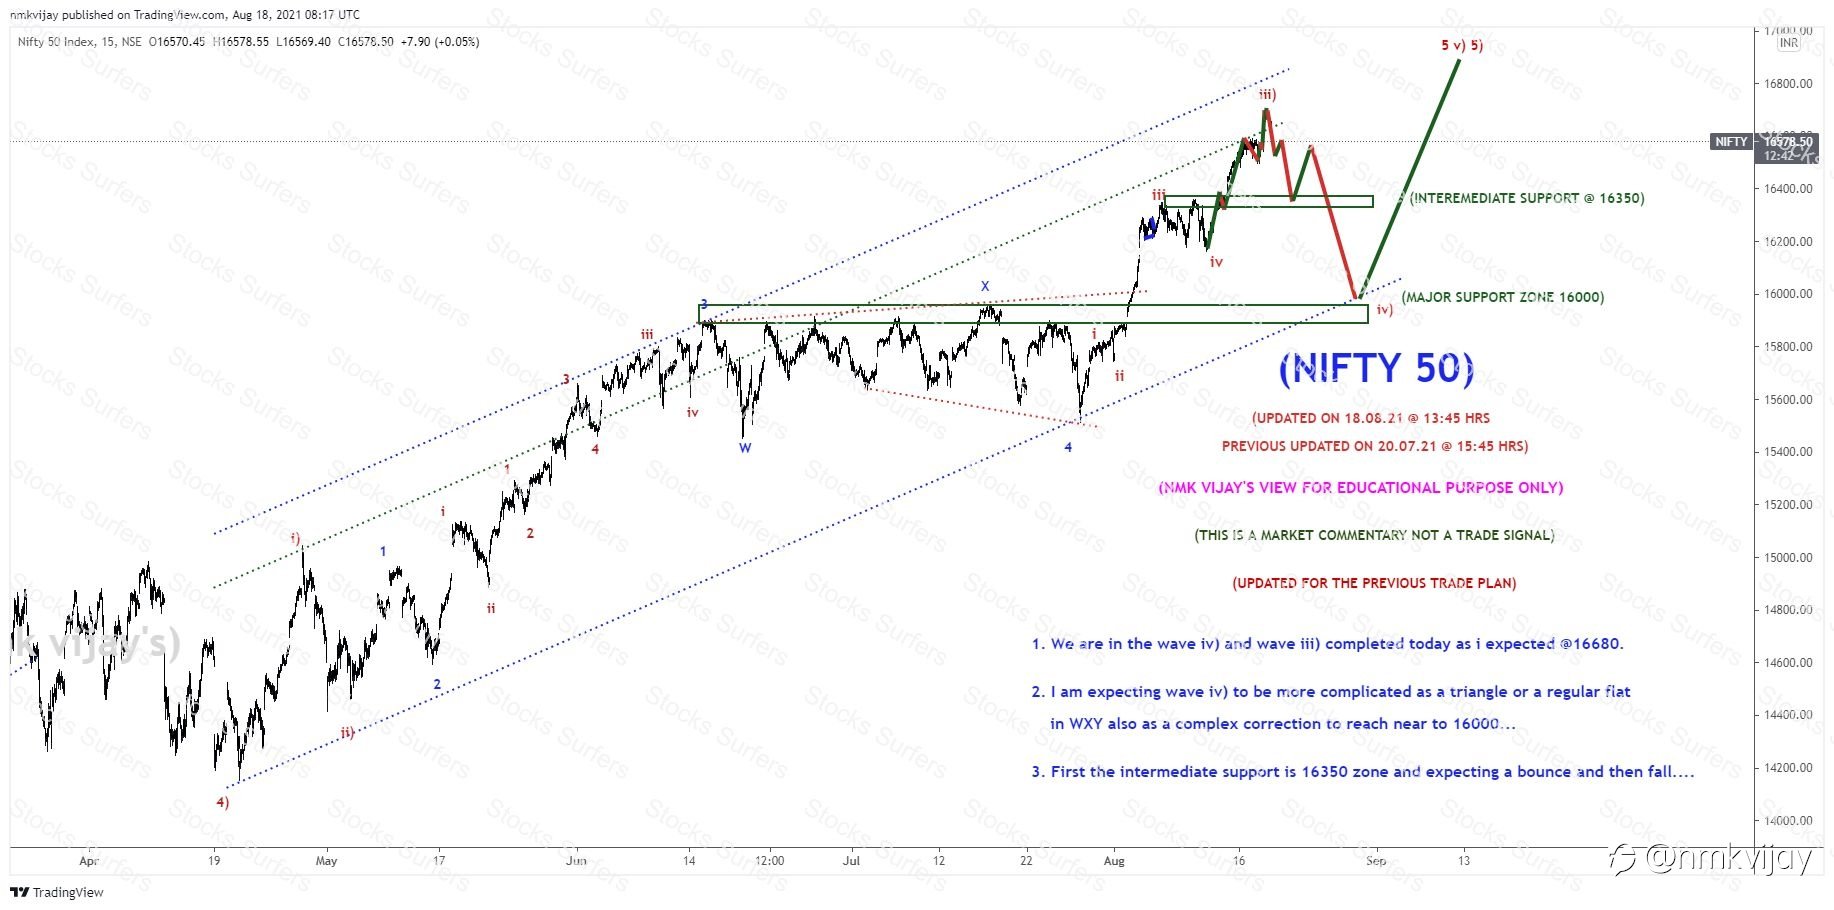 NIFTY As per my view in today's premarket prediction video, it got rejected @ 16700 zone